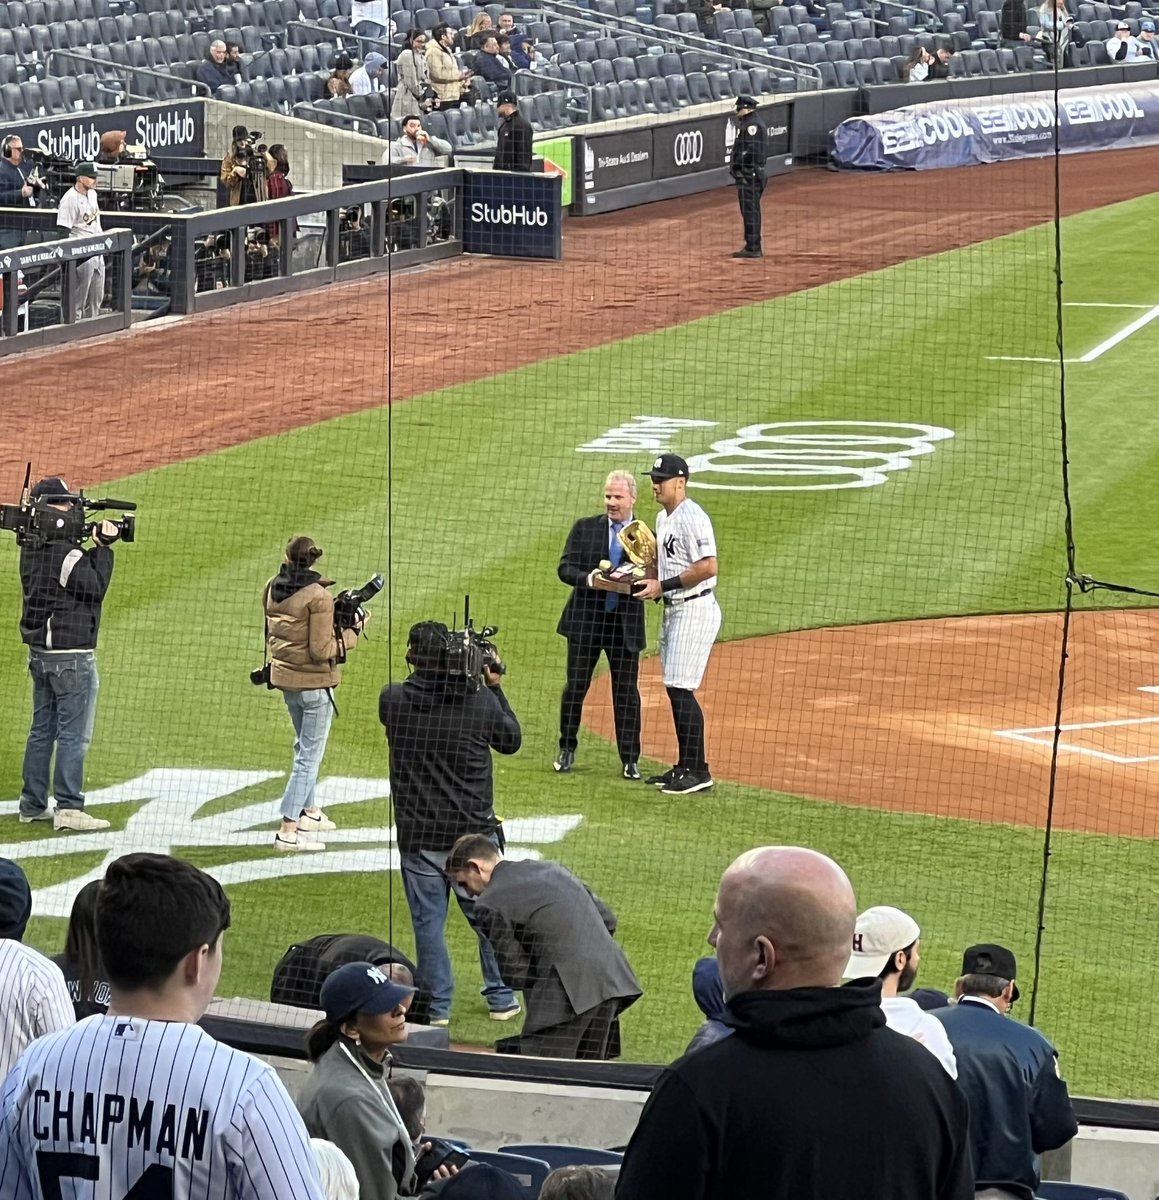 Anthony Volpe receives his Gold Glove award! Yankees 4 - Oakland 3. Great night in the Bronx! #baseball #mlb #nyc